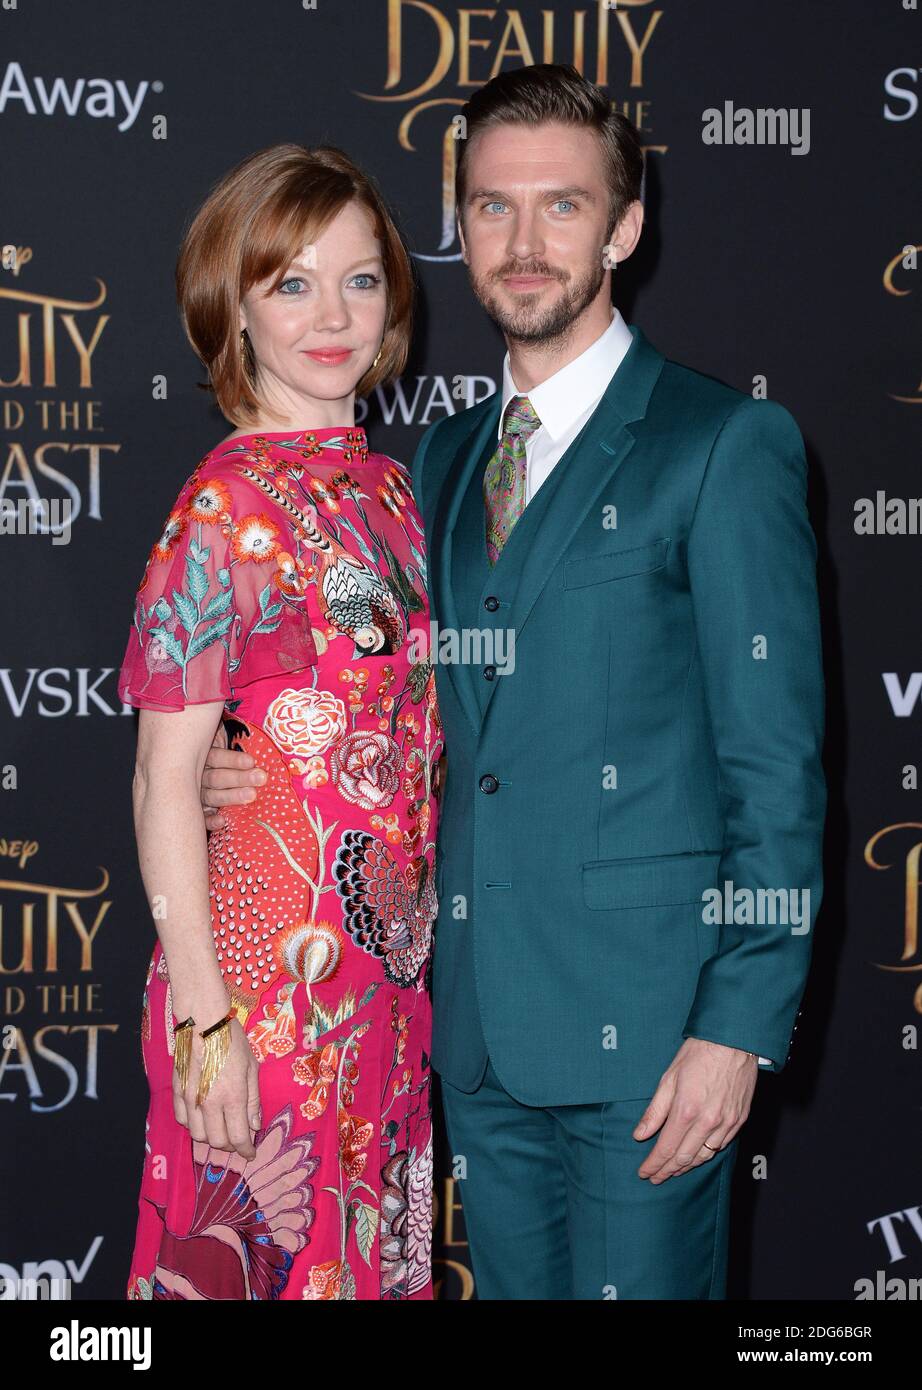 Dan Stevens, Susie Hariet attend the Premiere of Disney's 'Beauty And The Beast' at El Capitan Theatre on March 2, 2017 in Los Angeles, CA, USA. Photo by Lionel Hahn/ABACAPRESS.COM Stock Photo